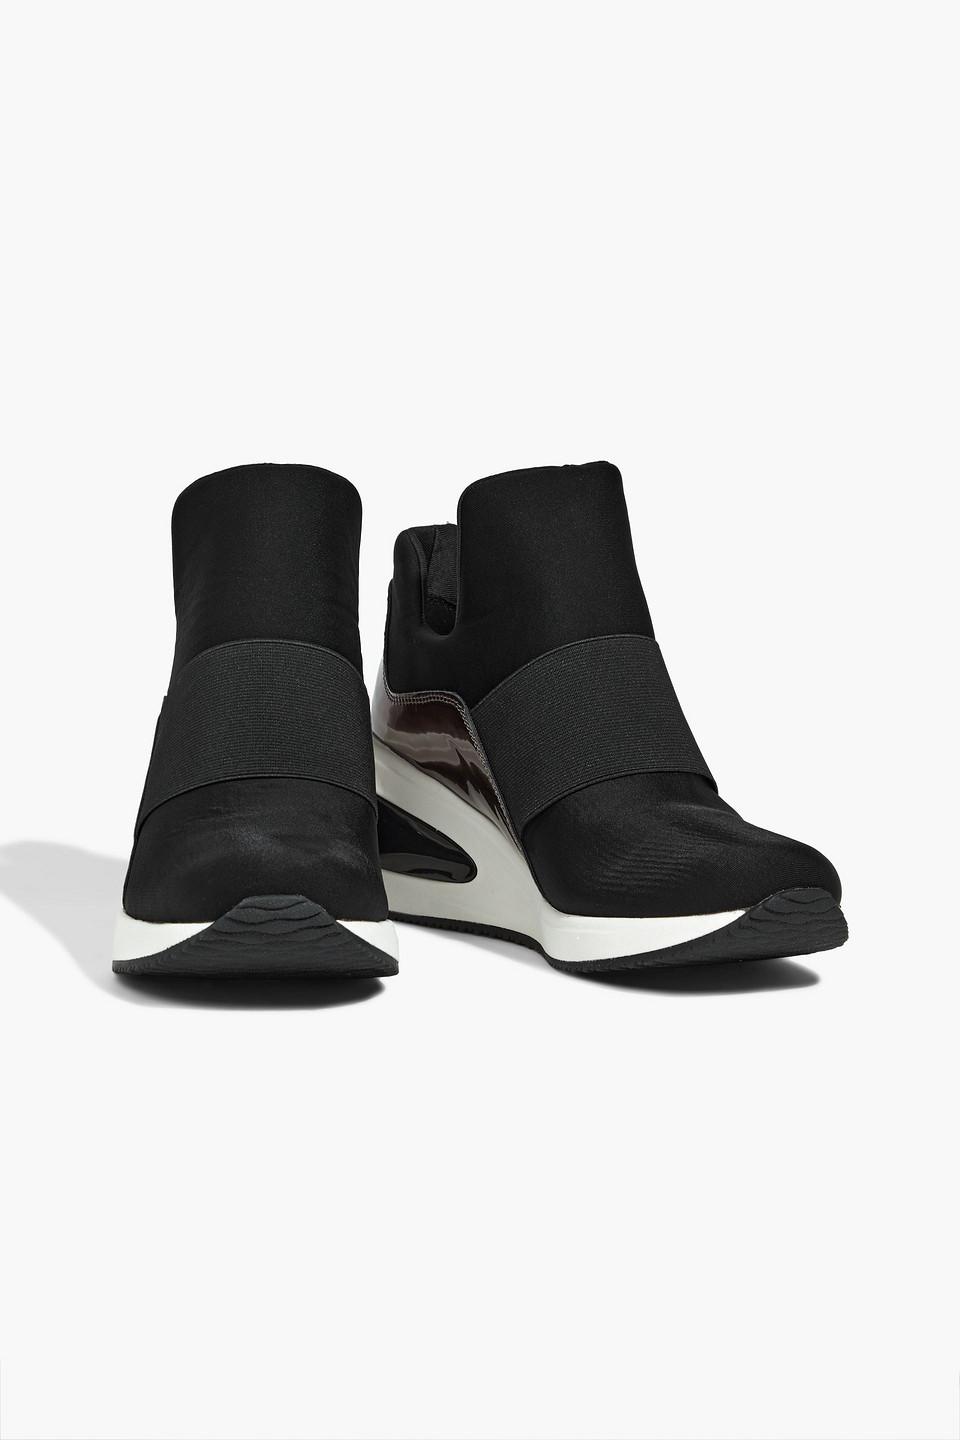 DKNY Borg Stretch-knit Slip-on Wedge Sneakers in Black | Lyst